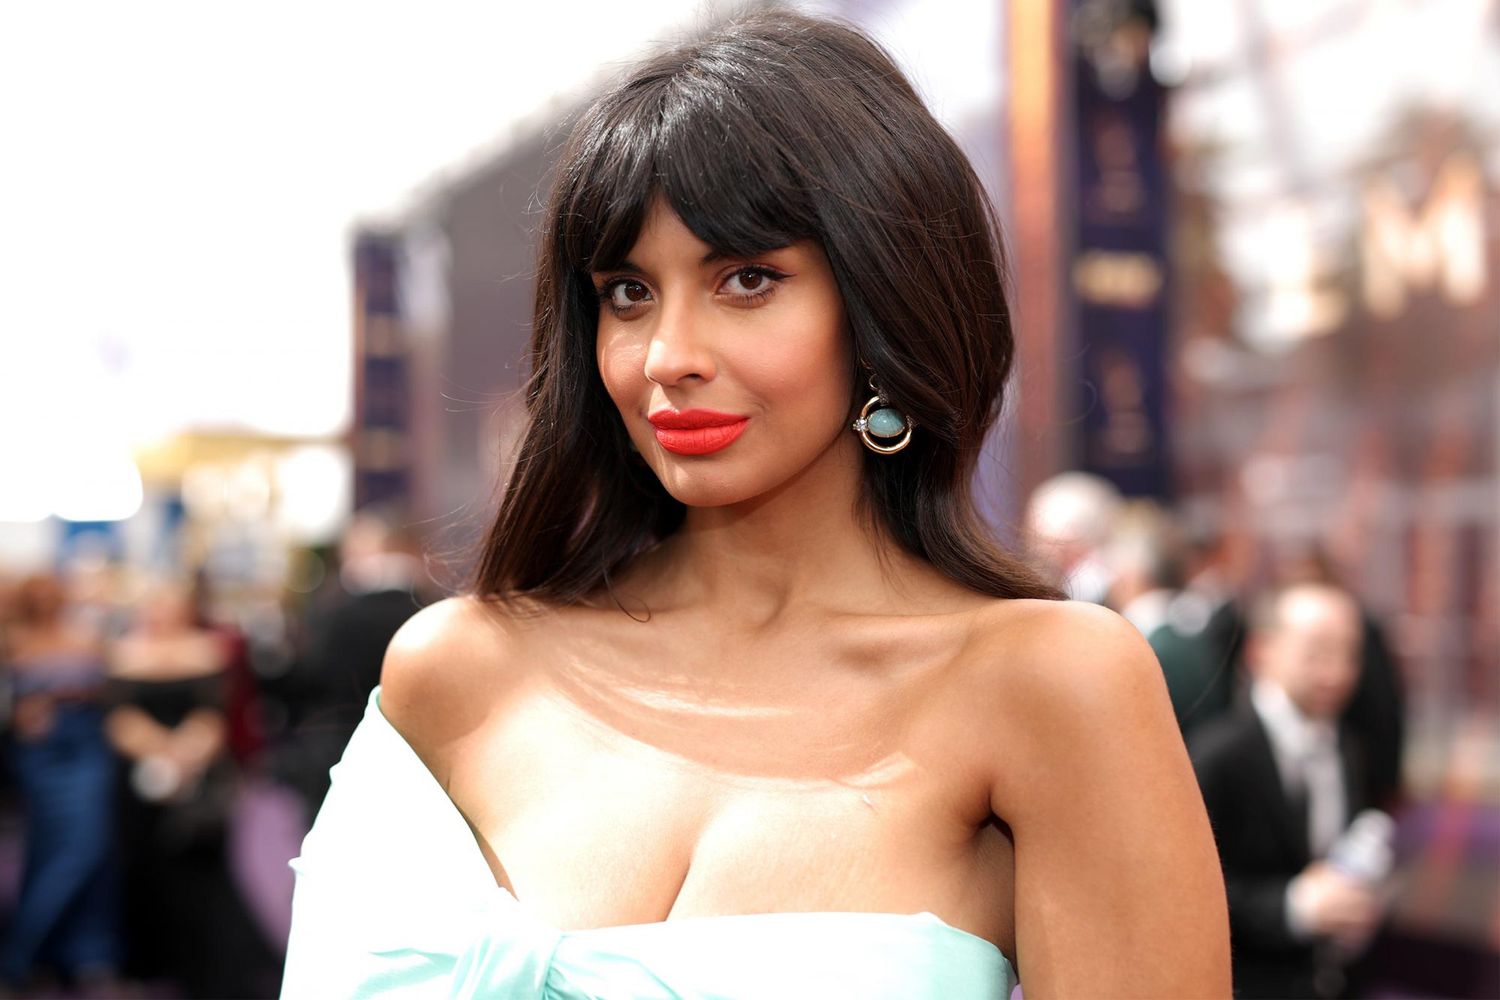 She-Hulk: Attorney at Law’s Jameela Jamil responds to costume reaction - En...